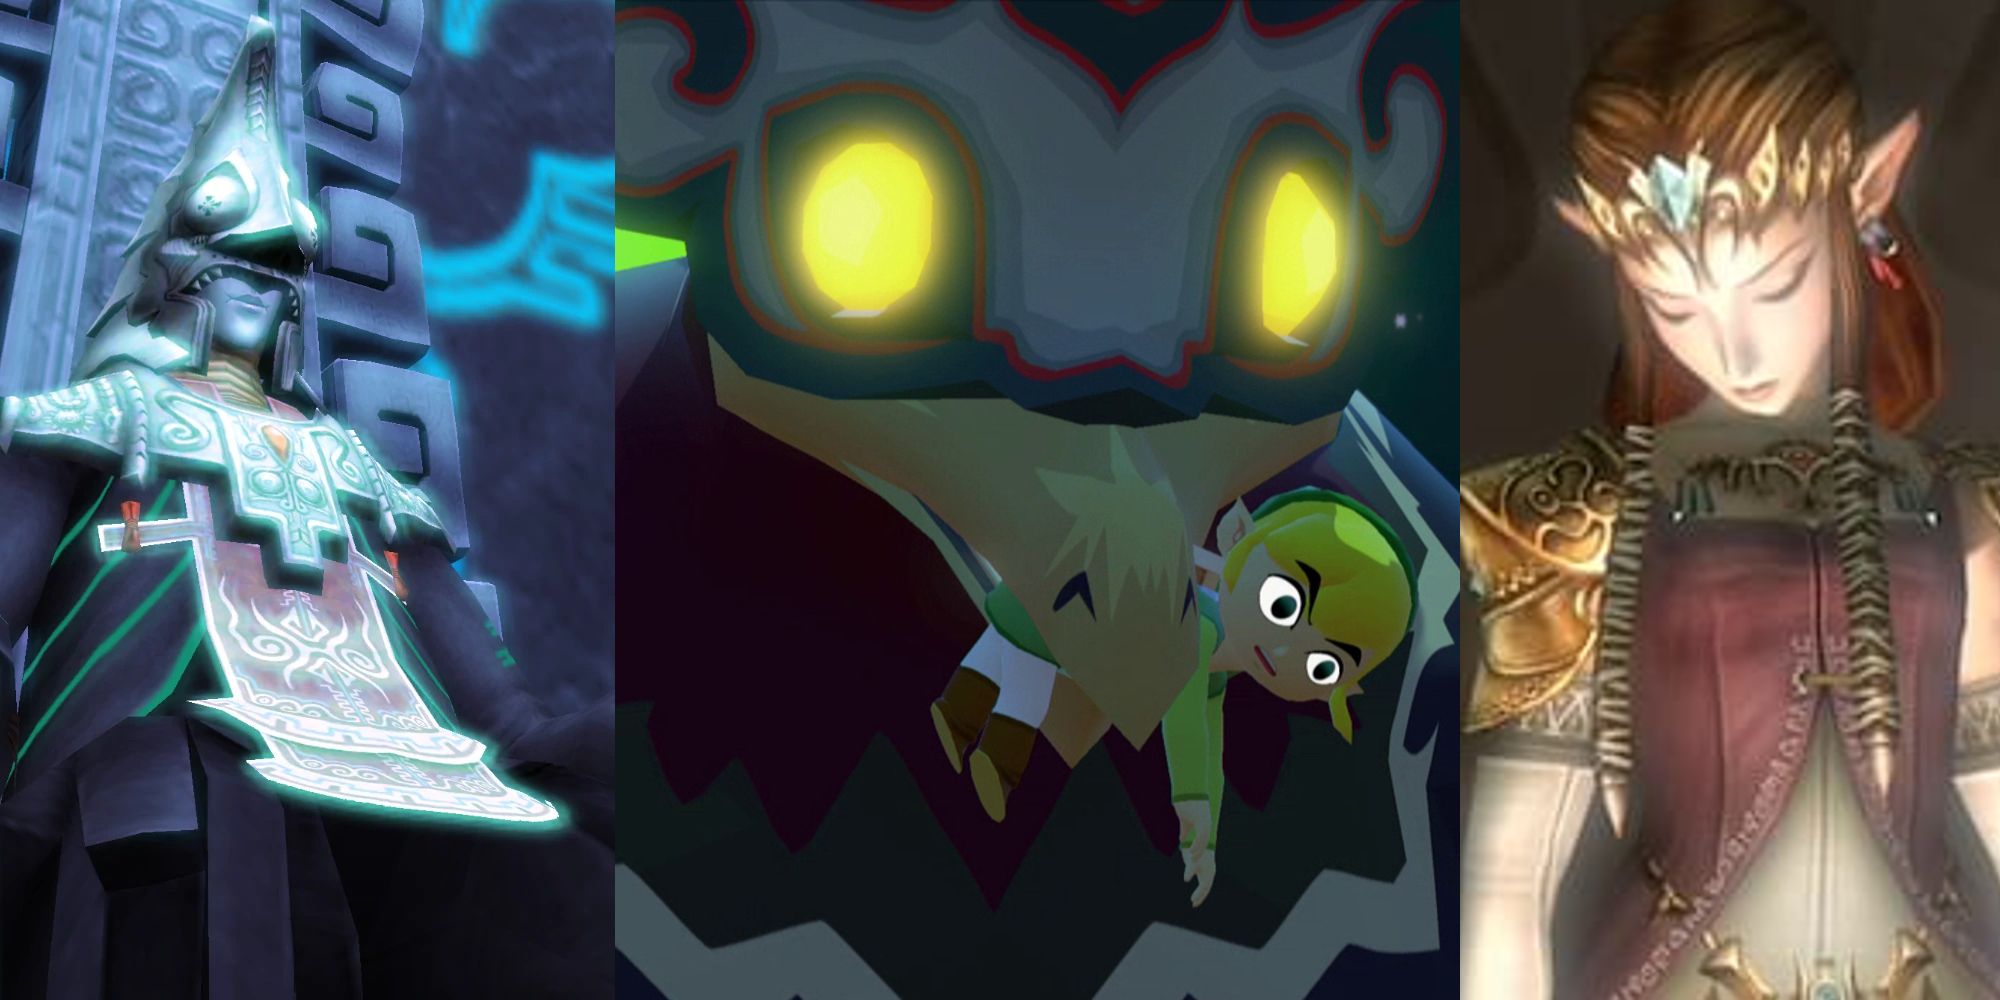 Zant sitting on his throne; Link being carried in the Helmaroc King's beak; Zelda unconscious as Ganon possesses her